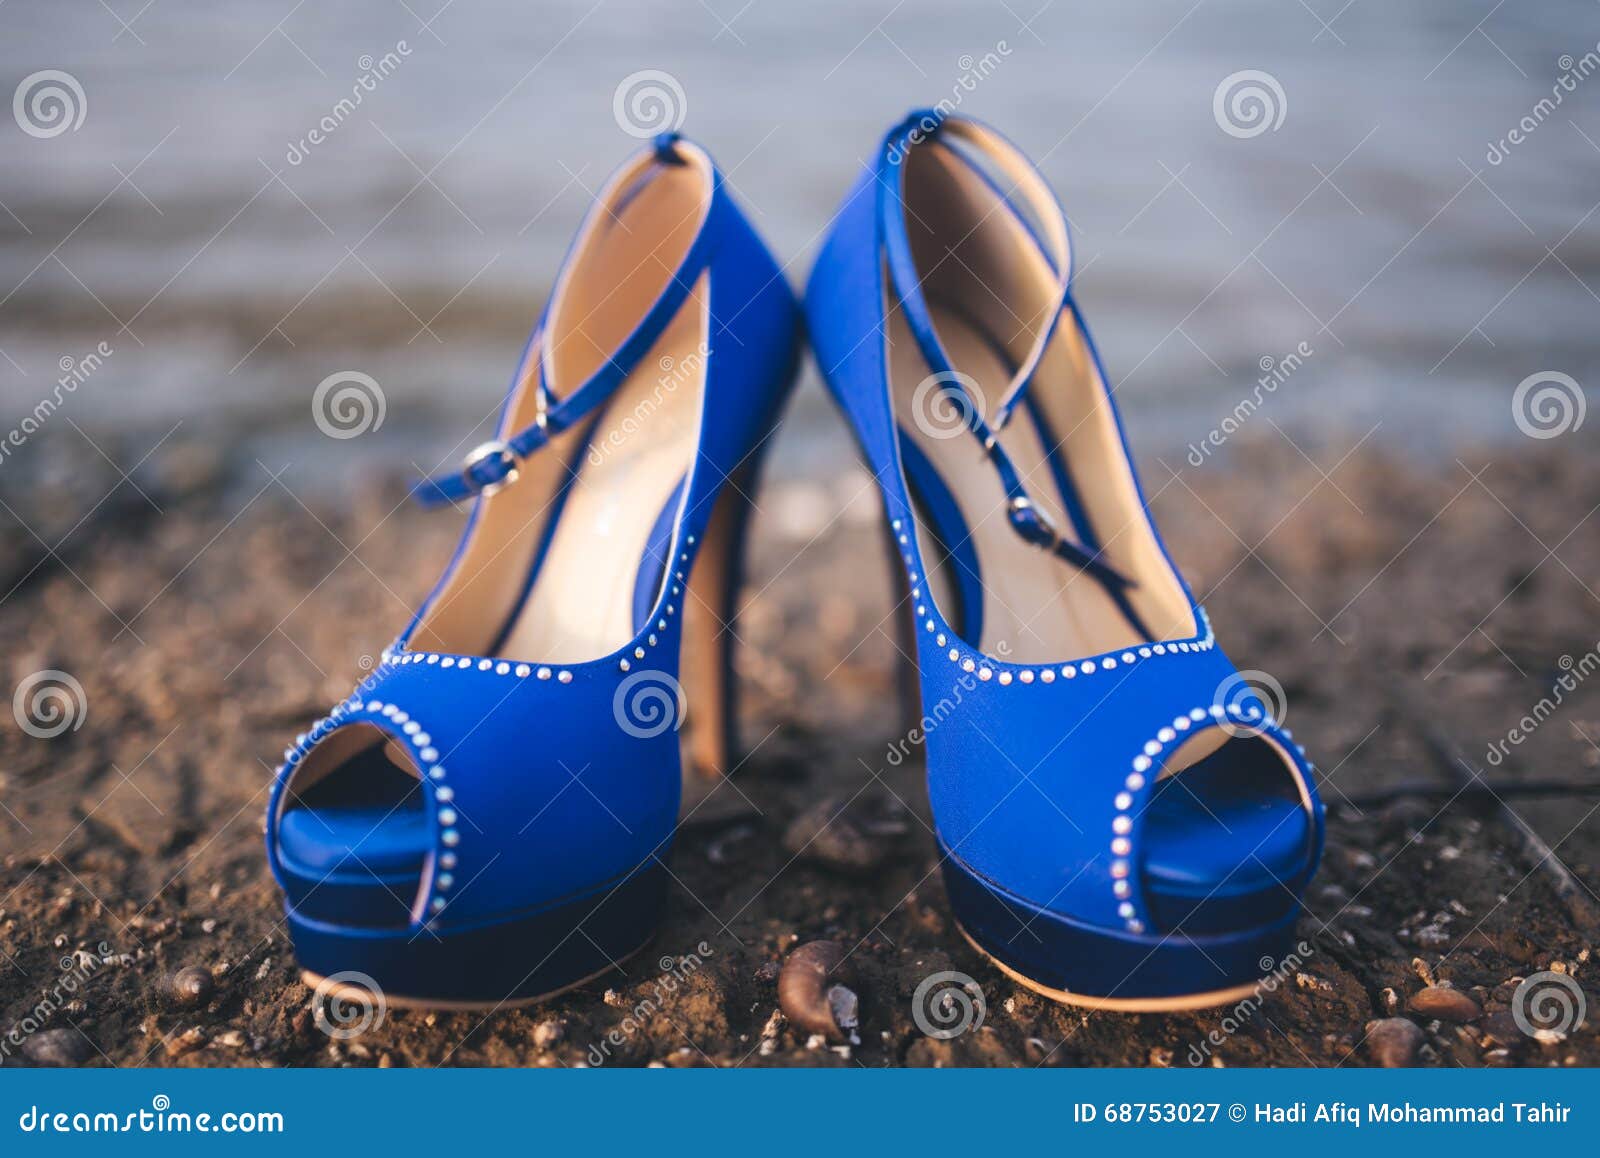 cinderella shoes in blue